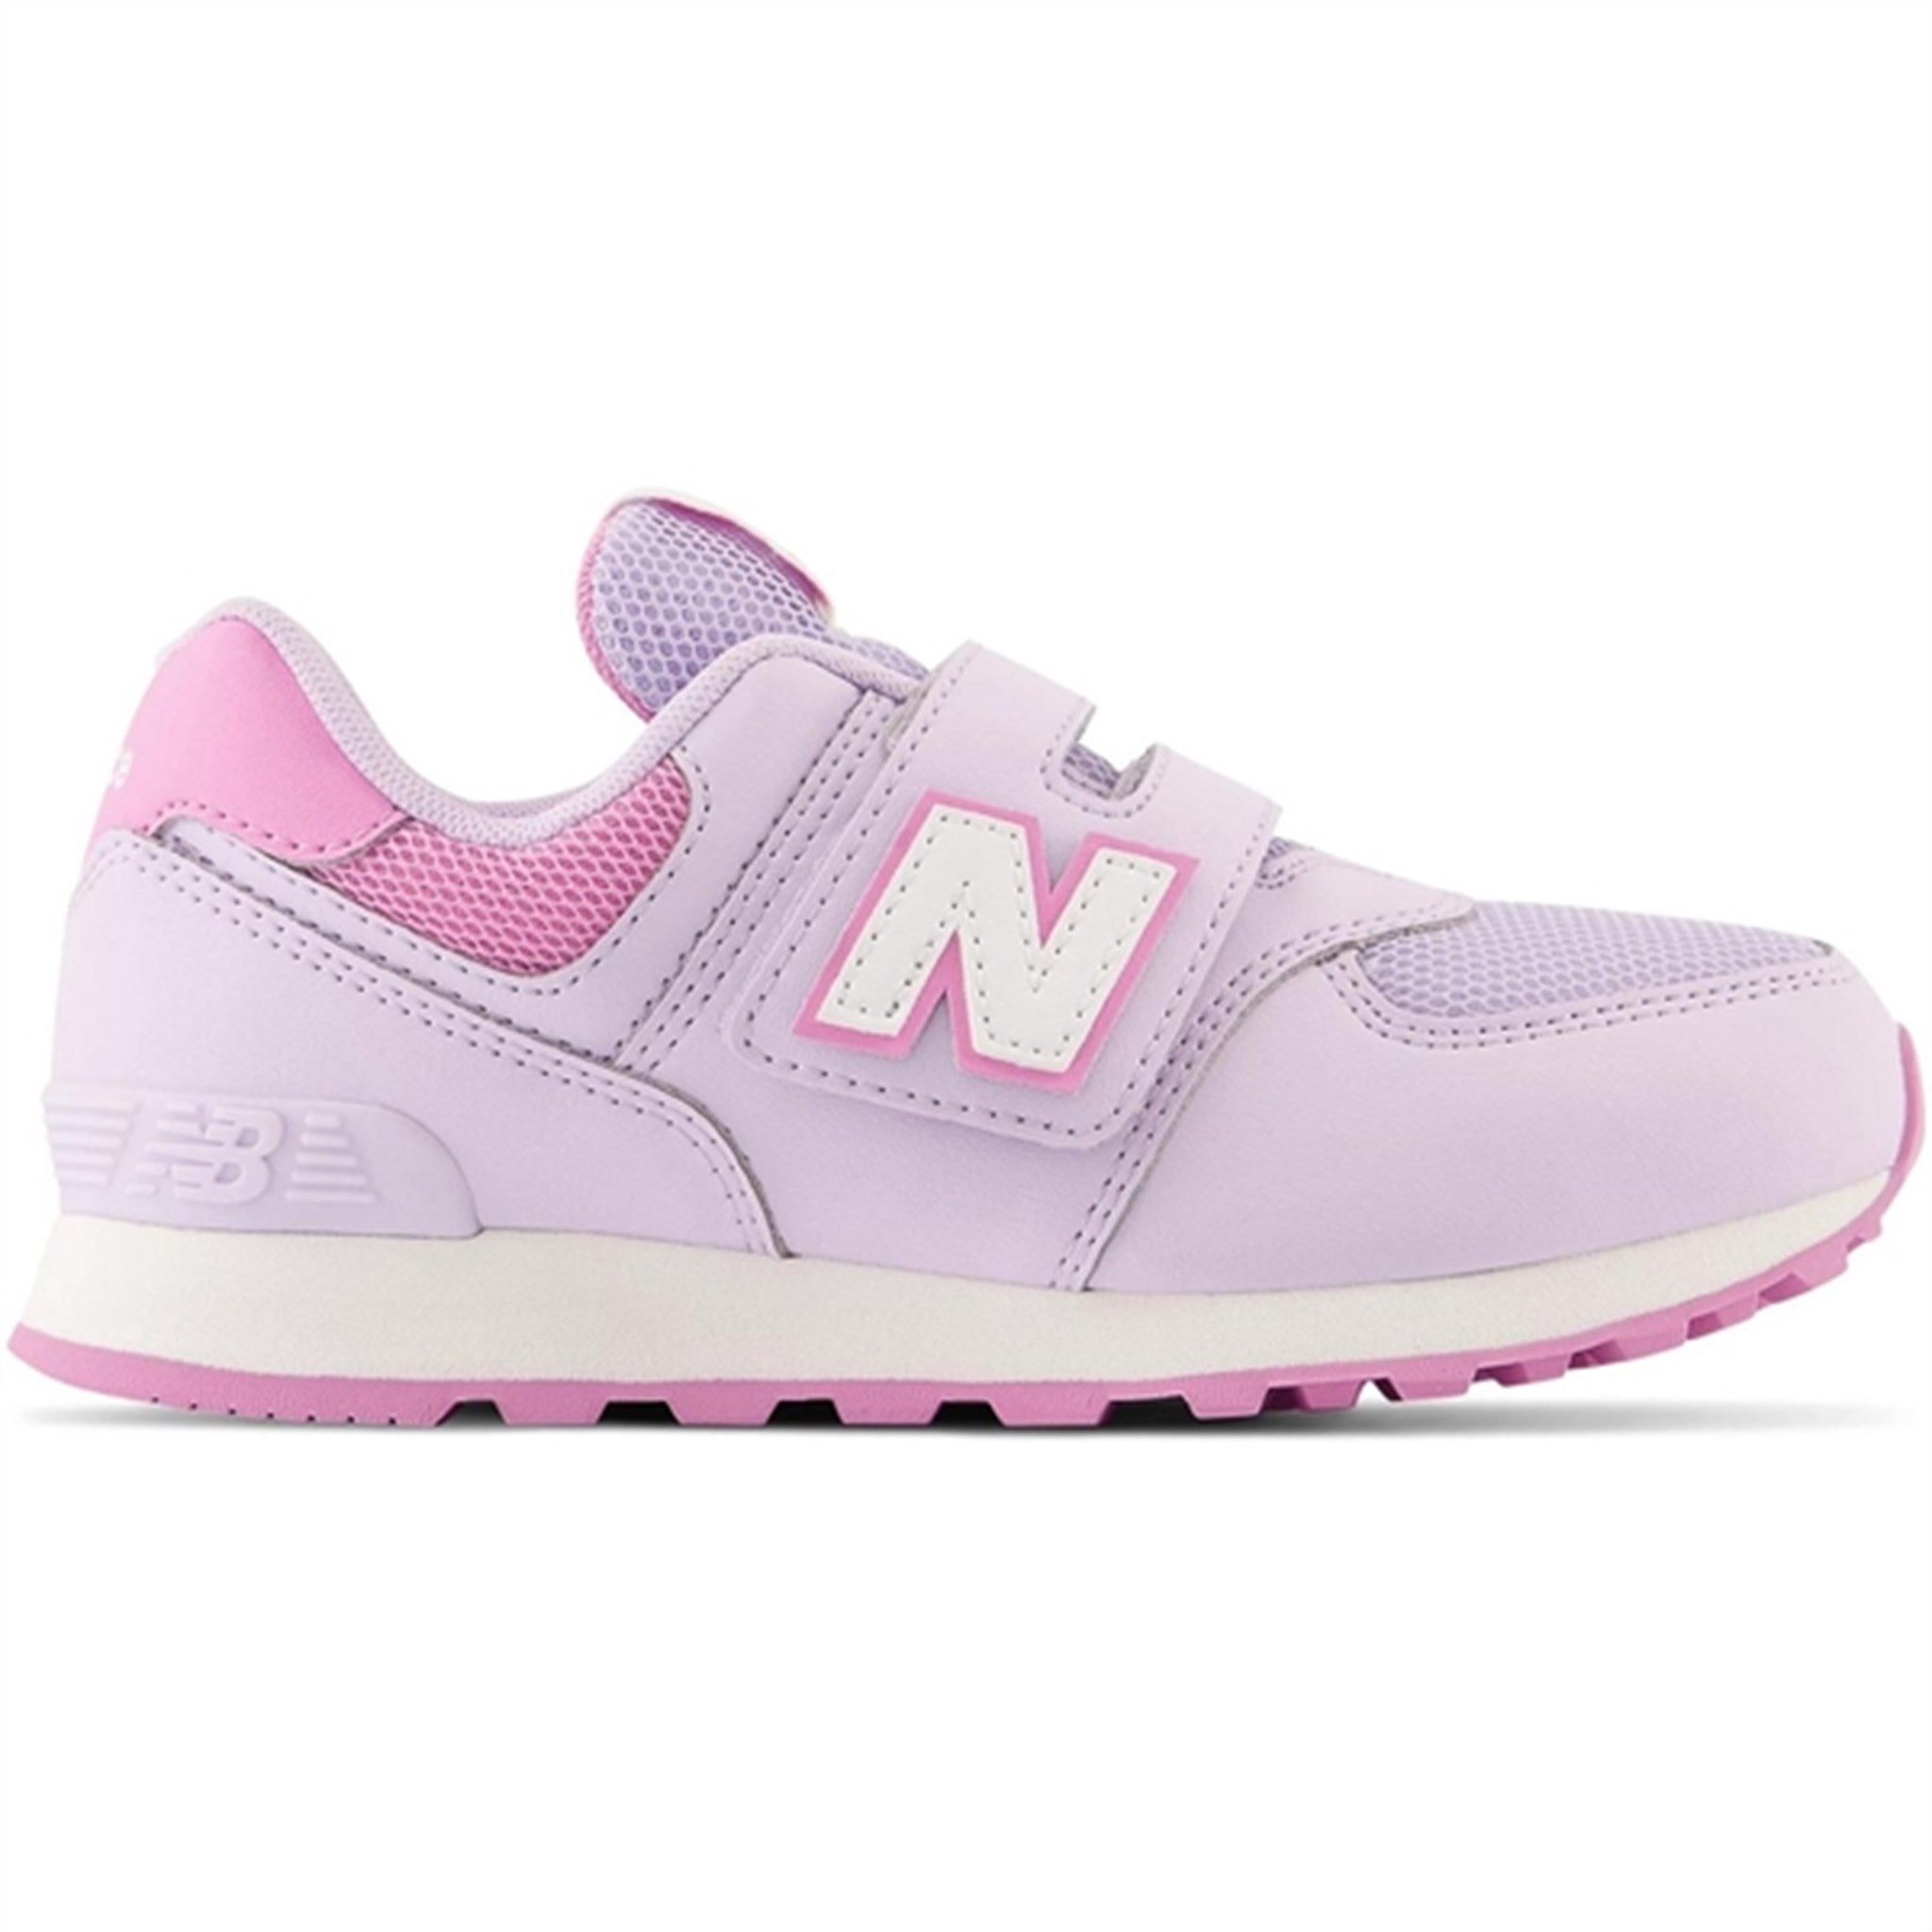 New Balance 574 Bright Lavender Sneakers 3